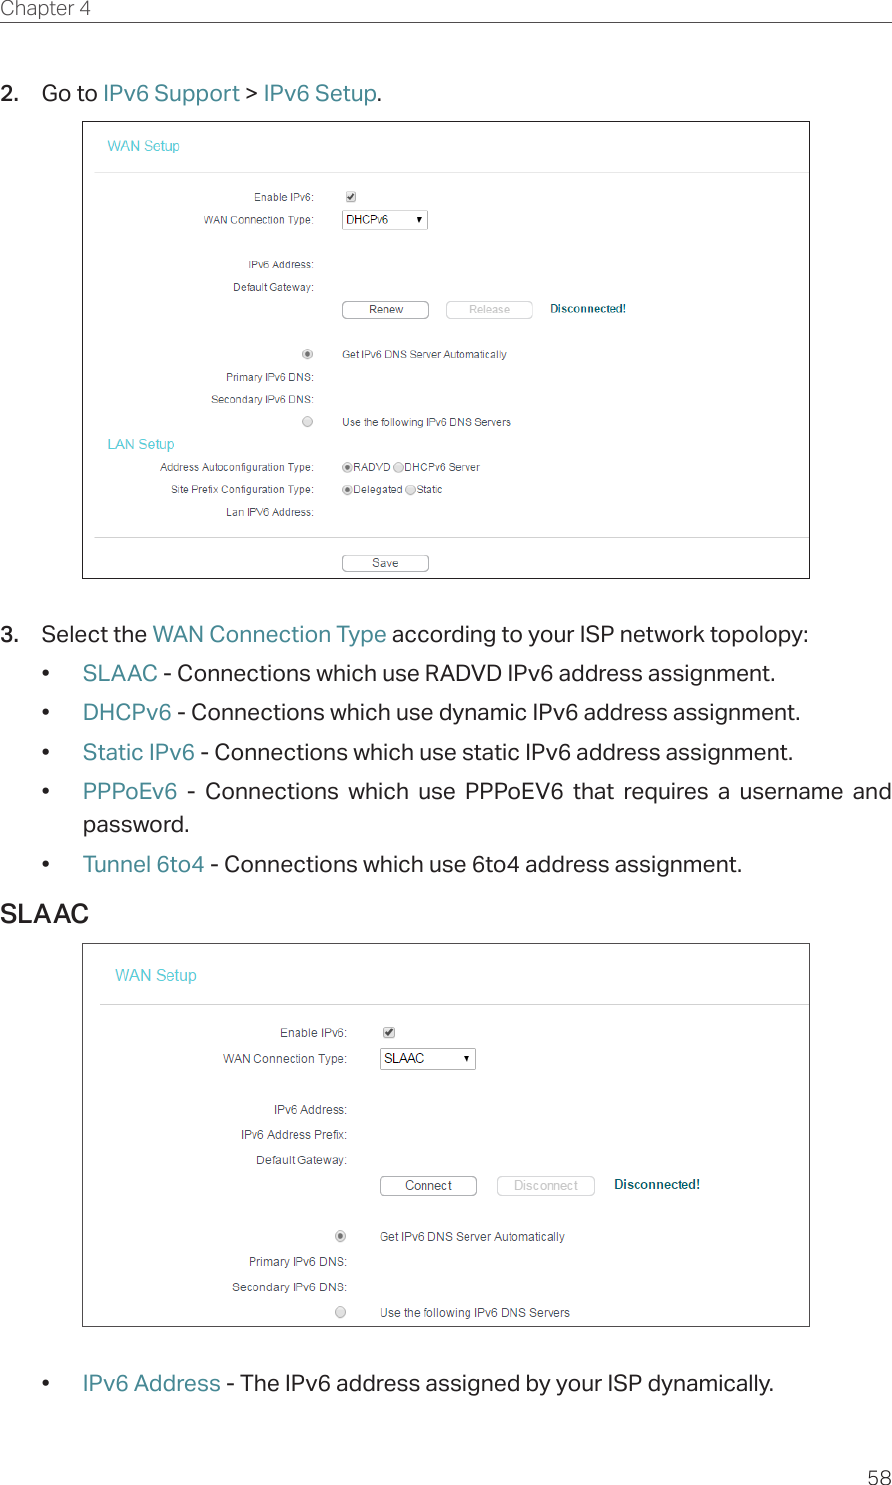 58Chapter 4  2.  Go to IPv6 Support &gt; IPv6 Setup.3.  Select the WAN Connection Type according to your ISP network topolopy:•  SLAAC - Connections which use RADVD IPv6 address assignment.•  DHCPv6 - Connections which use dynamic IPv6 address assignment. •  Static IPv6 - Connections which use static IPv6 address assignment. •  PPPoEv6  - Connections which use PPPoEV6 that requires a username and password. •  Tunnel 6to4 - Connections which use 6to4 address assignment.SLAAC•  IPv6 Address - The IPv6 address assigned by your ISP dynamically.